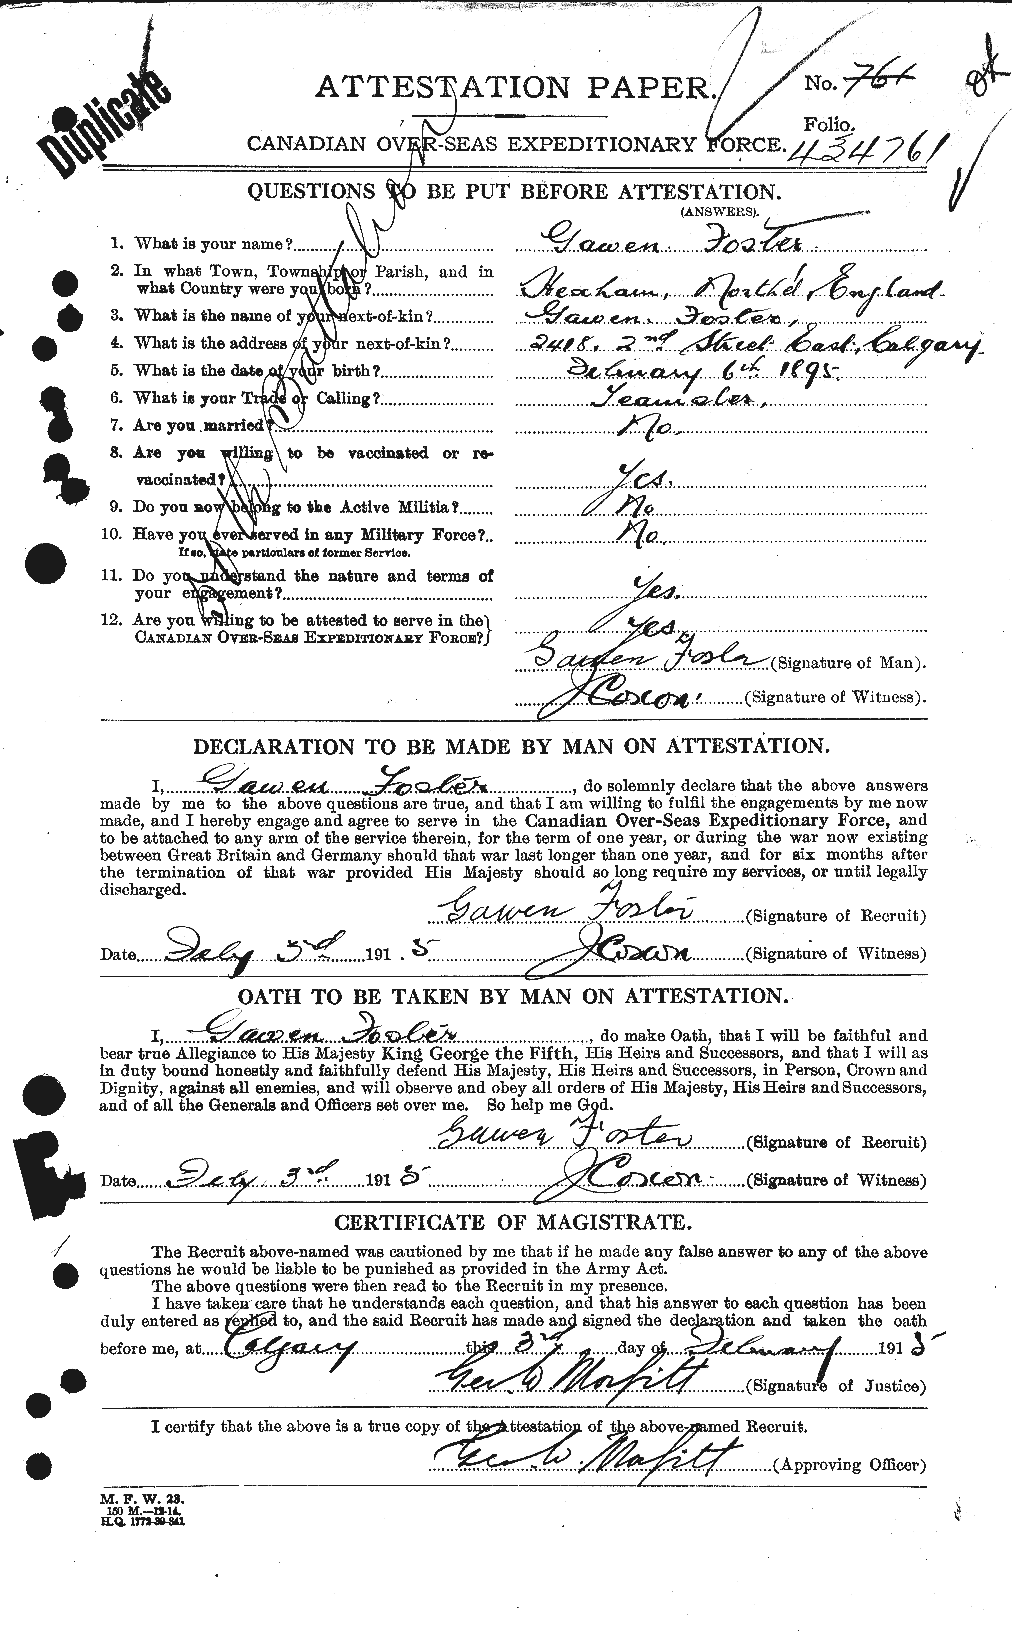 Personnel Records of the First World War - CEF 330659a